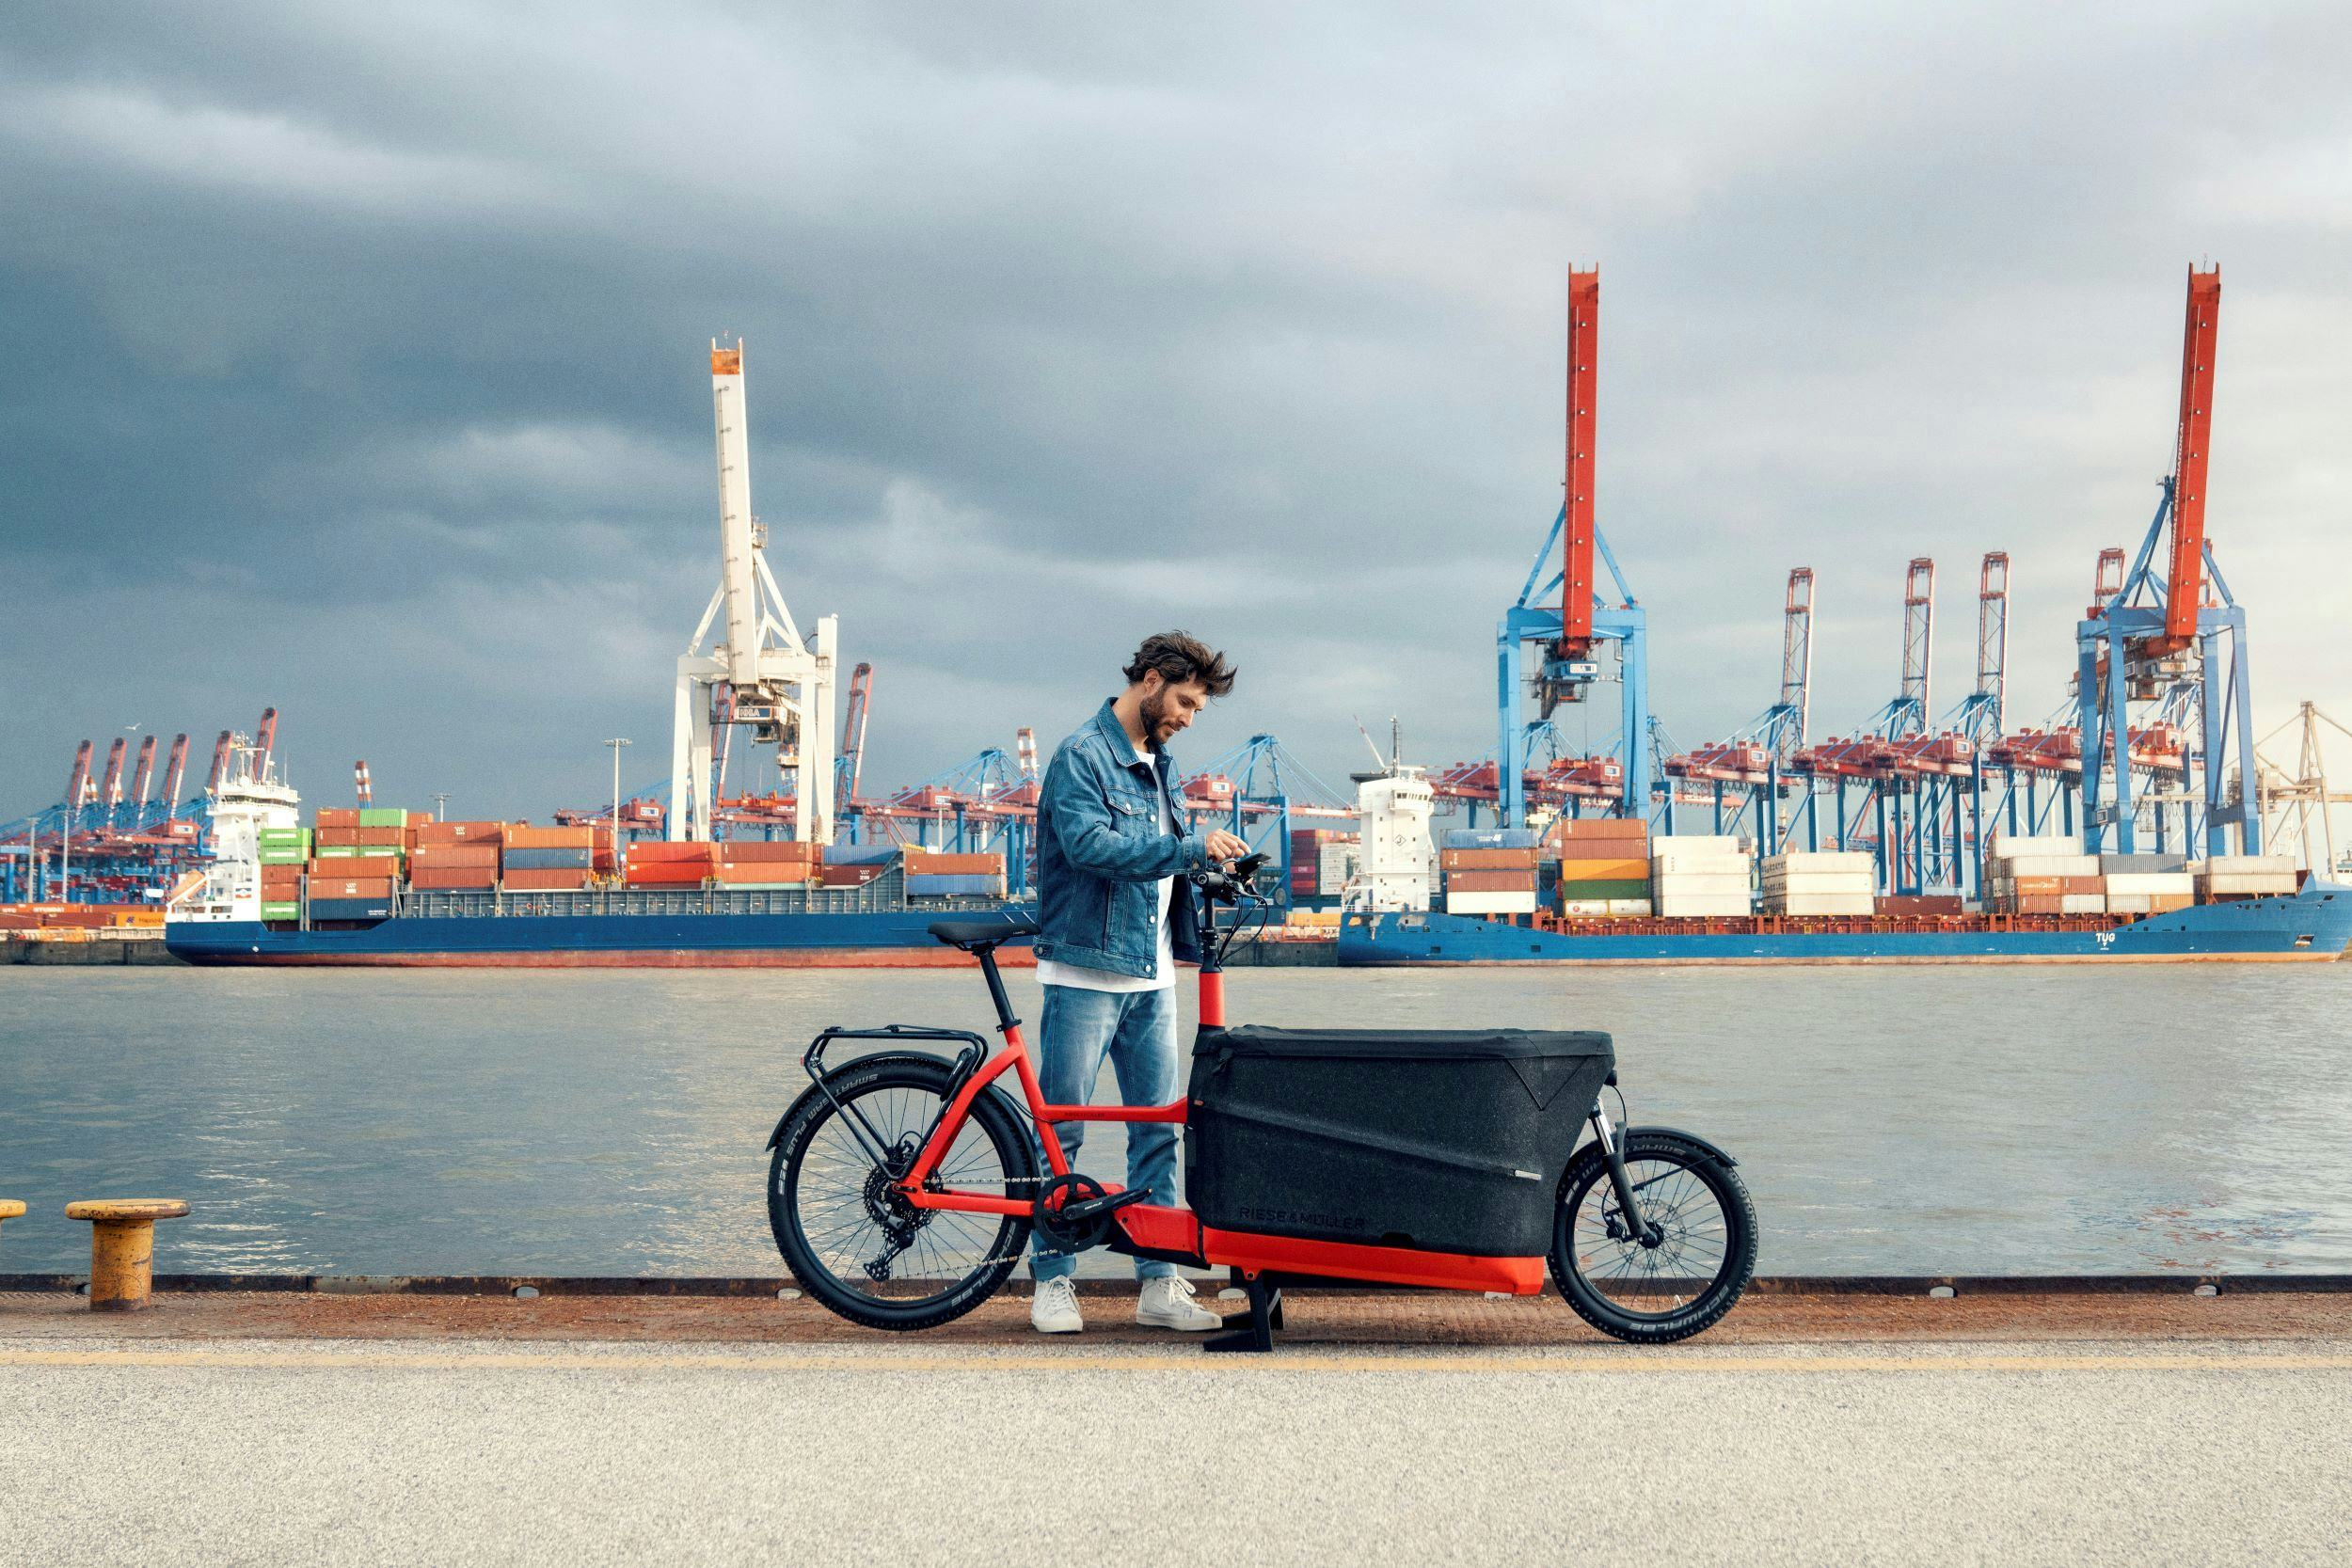 R&M wants to improve and stabilise delivery times for their products and has a goal of being the most sustainable company in the e-bike industry by 2025. - Photo R&M